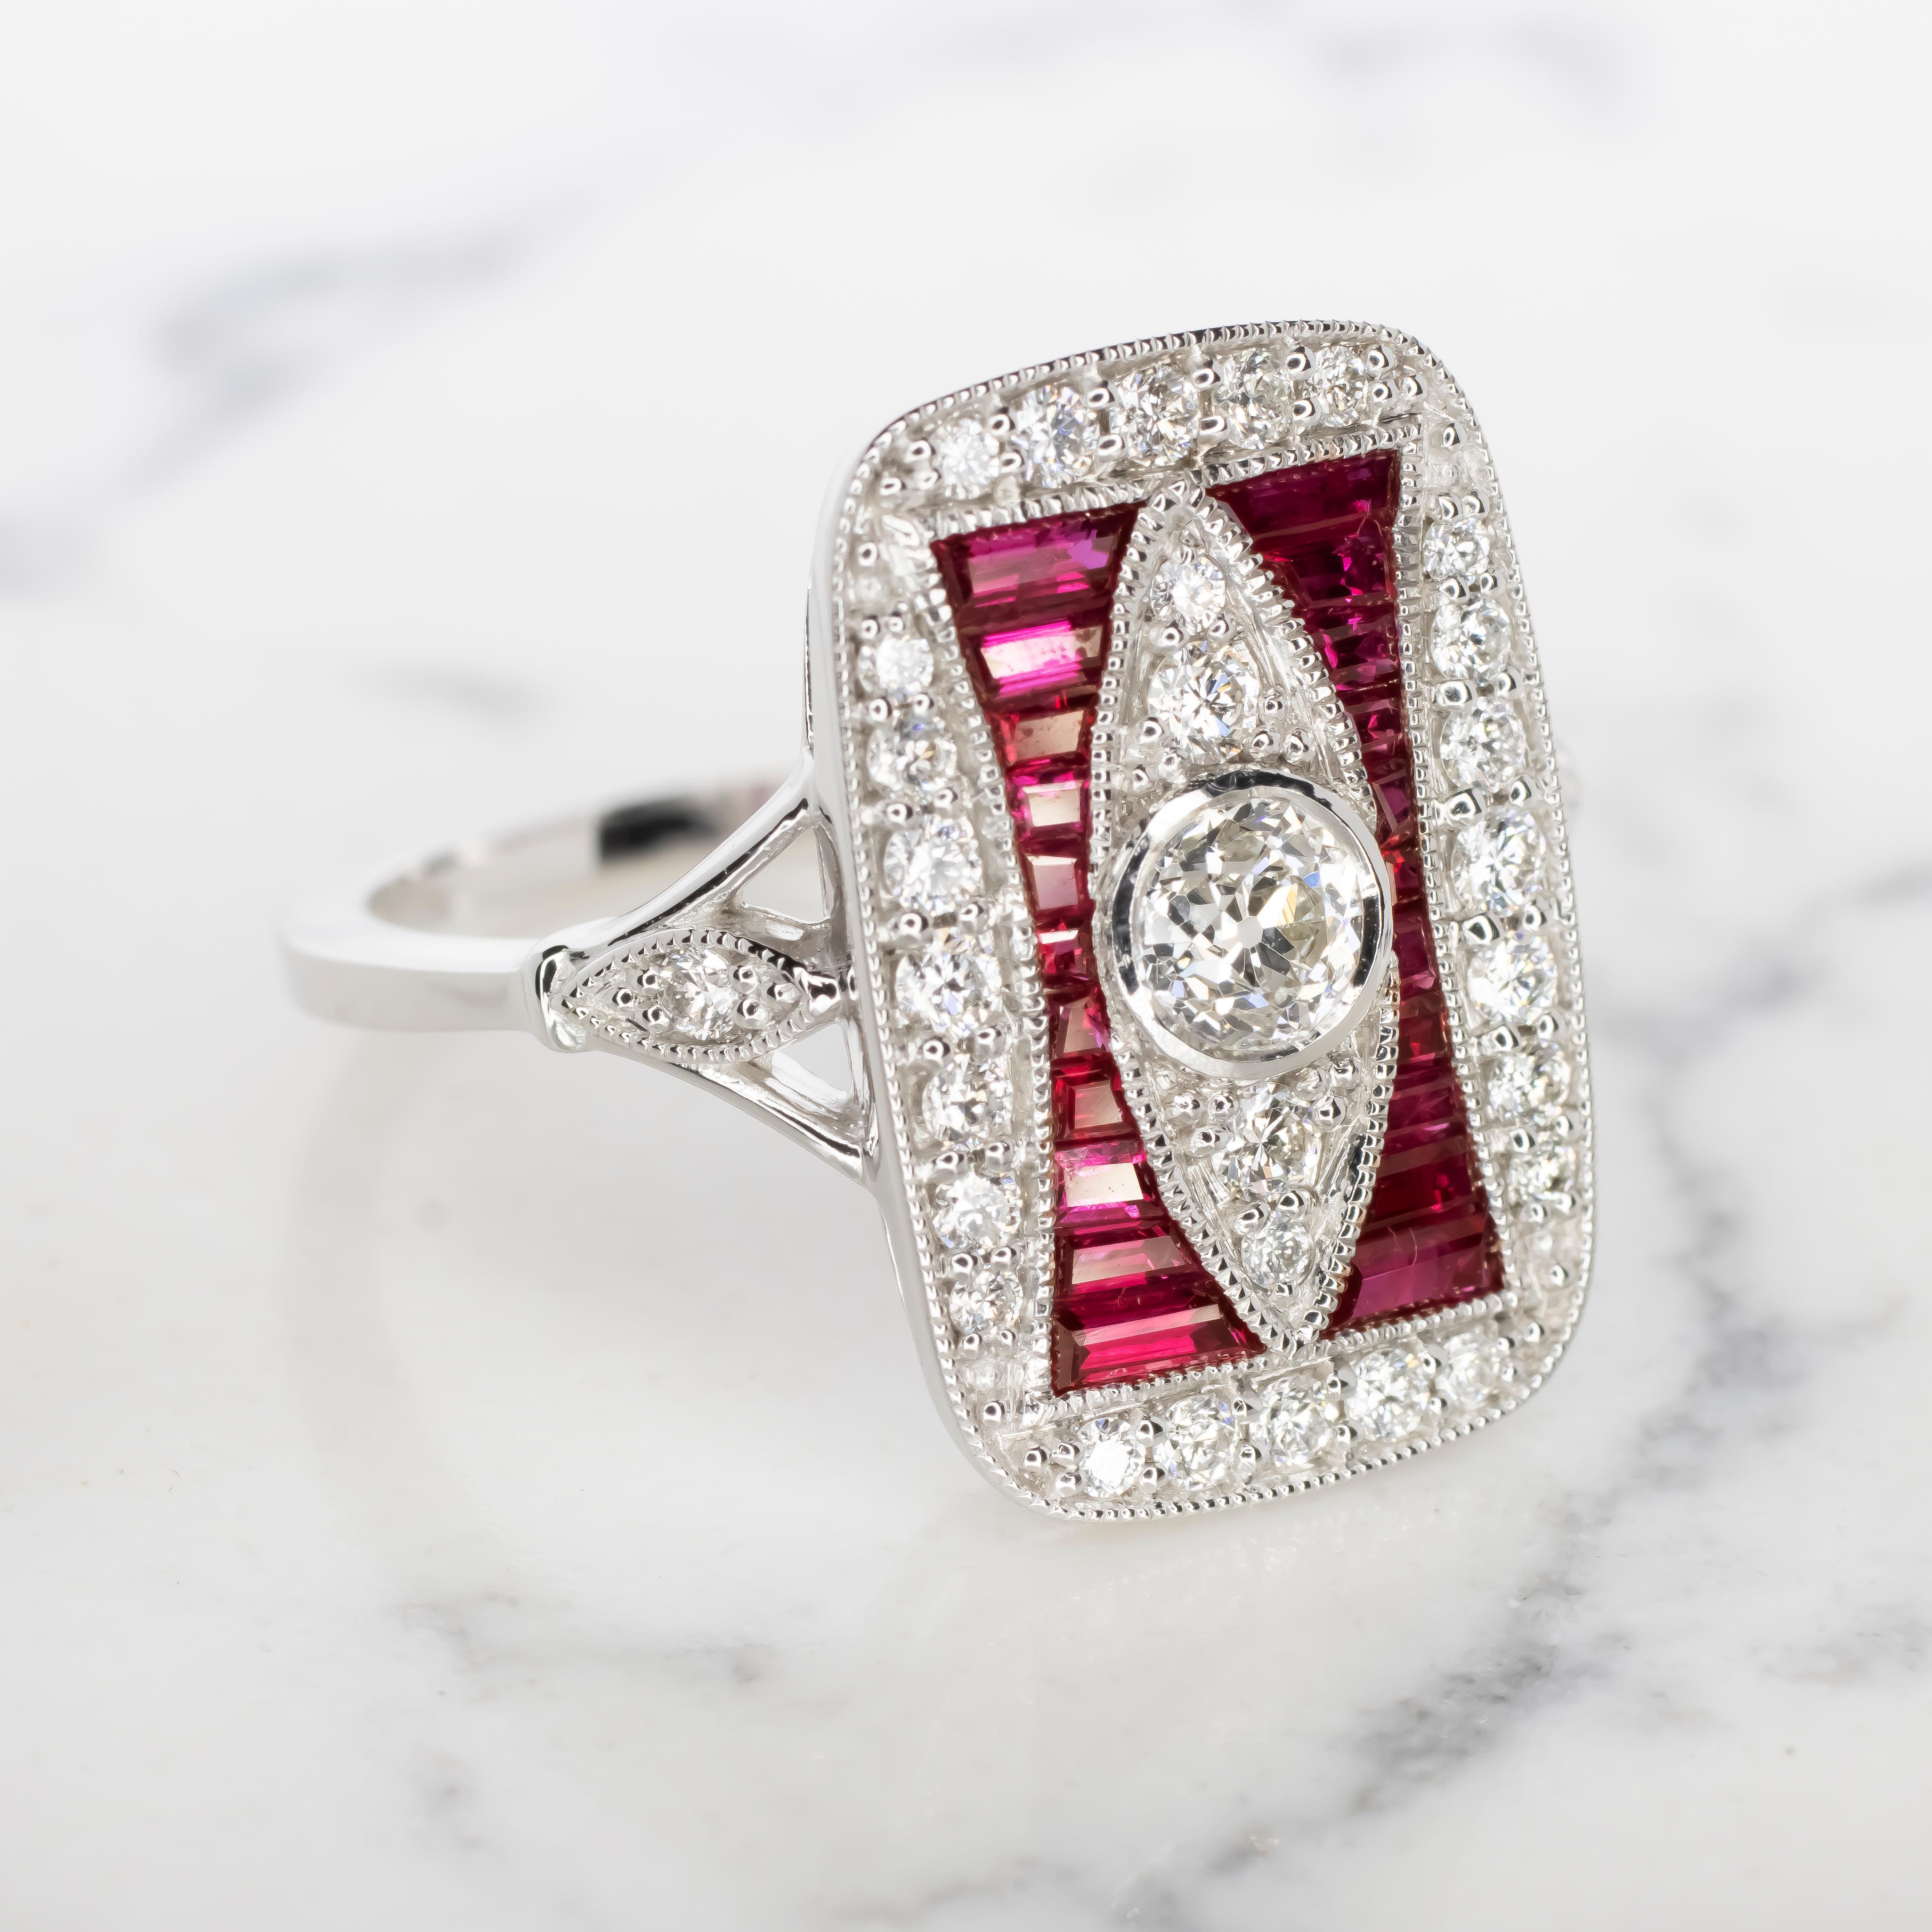 Introducing a captivating diamond and ruby ring exuding the elegance of Art Deco design, showcasing natural diamonds and rubies in a stunning arrangement that radiates rich color and irresistible sparkle.

Highlighted features include:

A vibrant